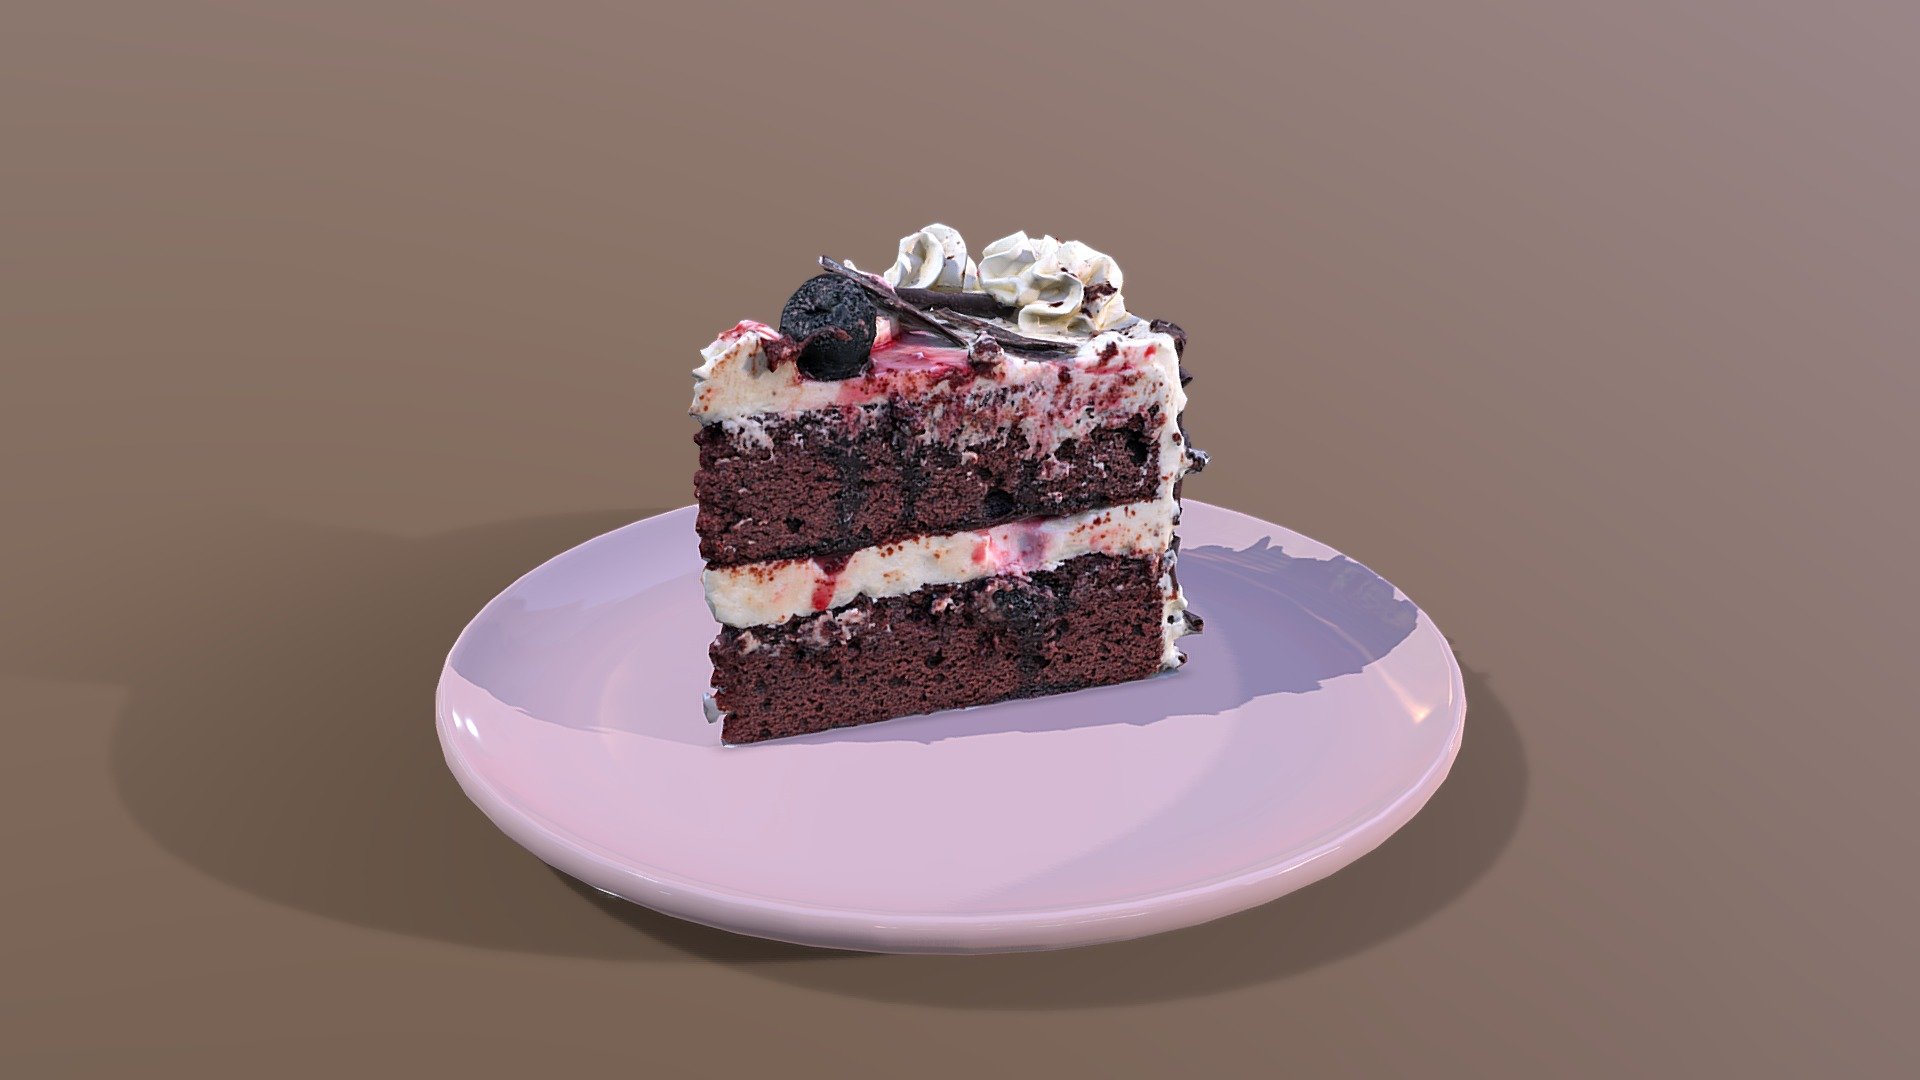 This iconic Black Forest Gateau, slice was created using photogrammetry which is made by CAKESBURG Premium Cake Shop in the UK. You can purchase real cake from this link: https://cakesburg.co.uk/products/chocolate-heaven-cake?_pos=1&amp;_sid=25d1b3fb8&amp;_ss=r

Slice Textures 4096*4096px PBR photoscan-based materials (Base Color, Normal, Roughness, Specular, AO)

Click here for the uncut version.

Click here for the cut &amp; slice version 3d model